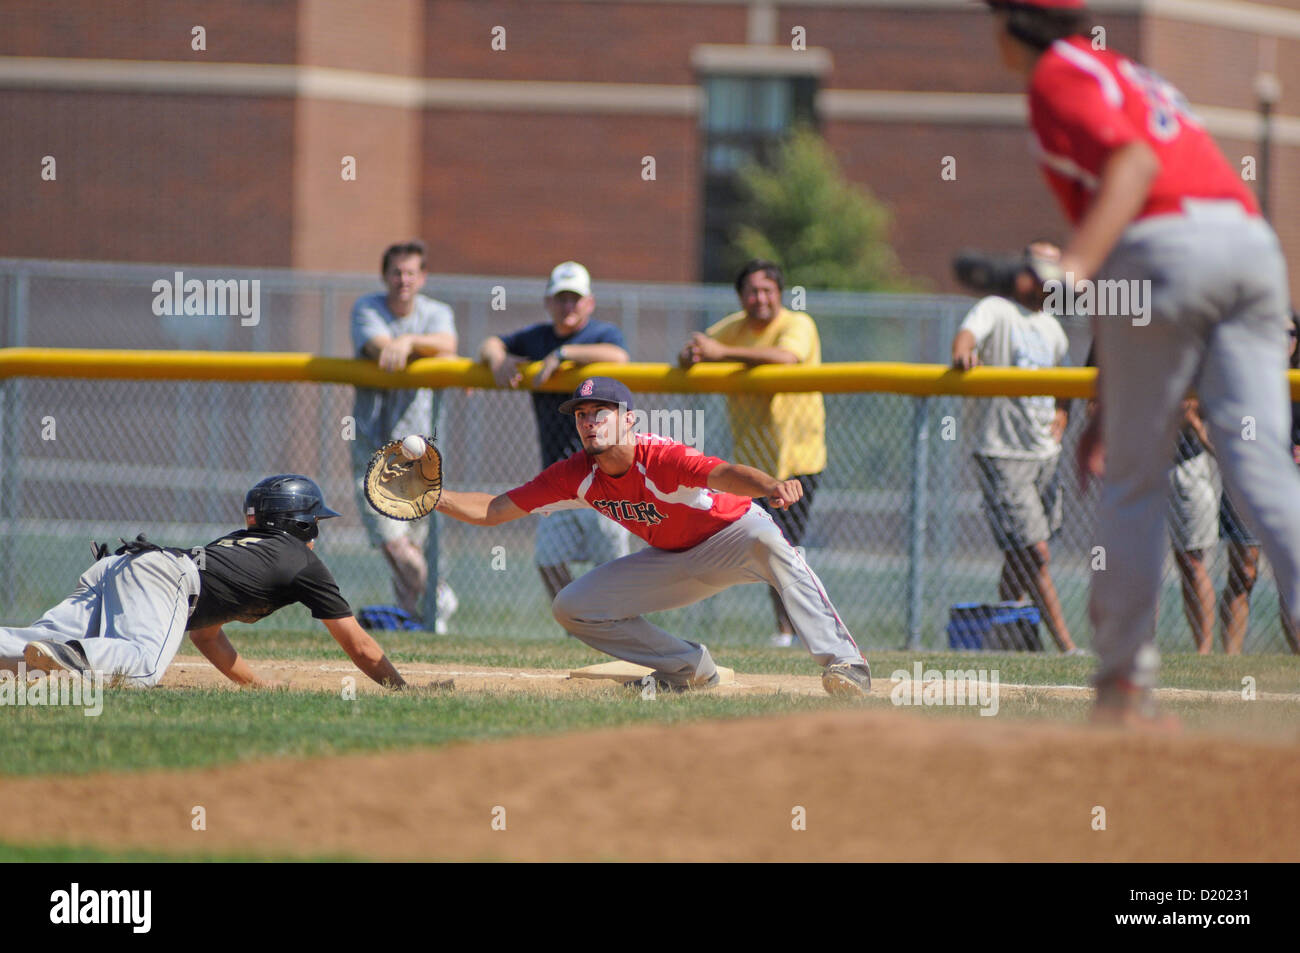 Runner dives back to the bag as first baseman reaches for a pick-off throw from his pitcher. USA. Stock Photo